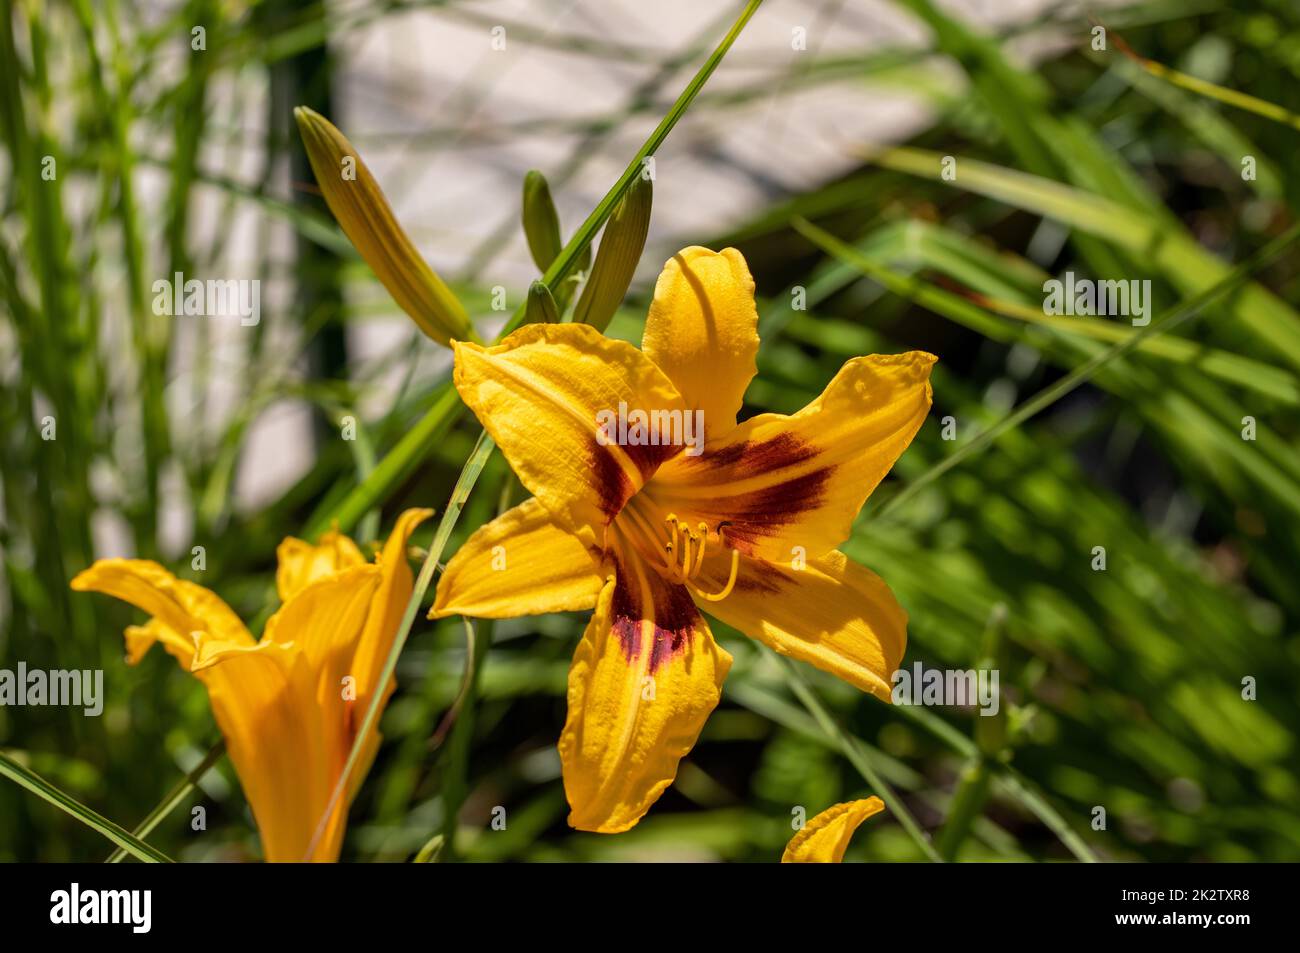 orange lily flower with delicate petals in garden Stock Photo